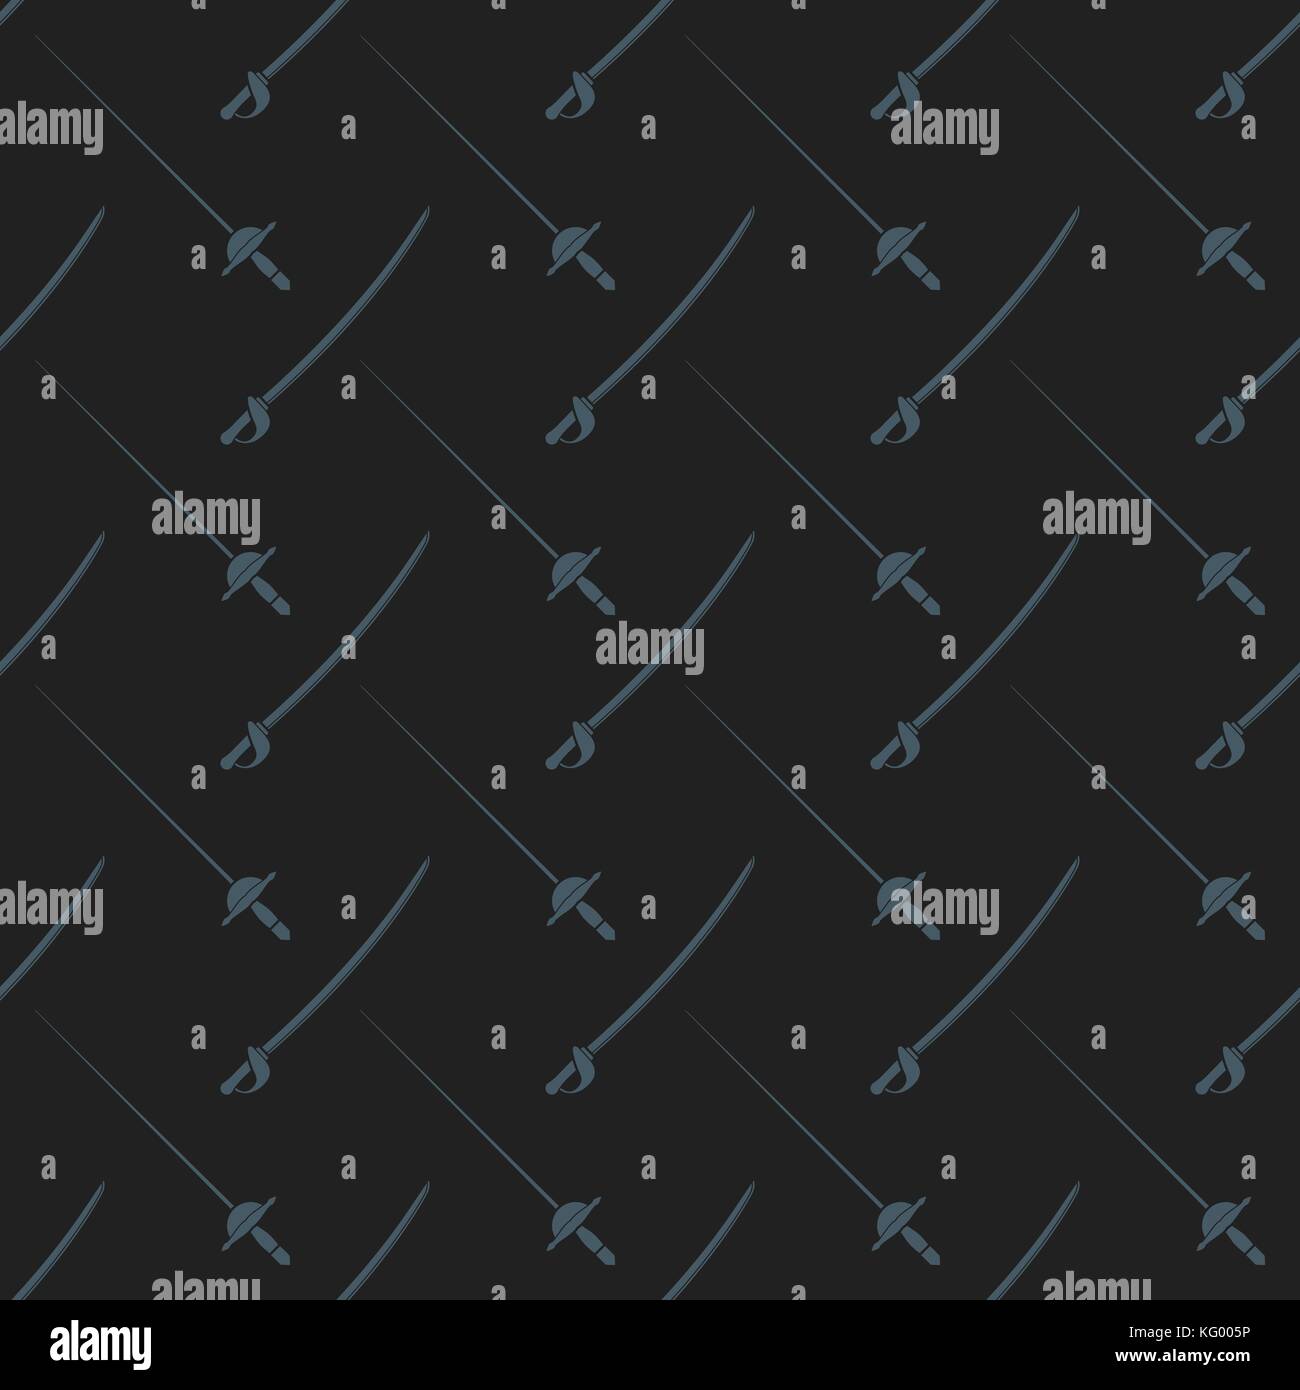 vector dark solid design sword saber medieval cold steel arms seamless pattern isolated on dark background Stock Vector